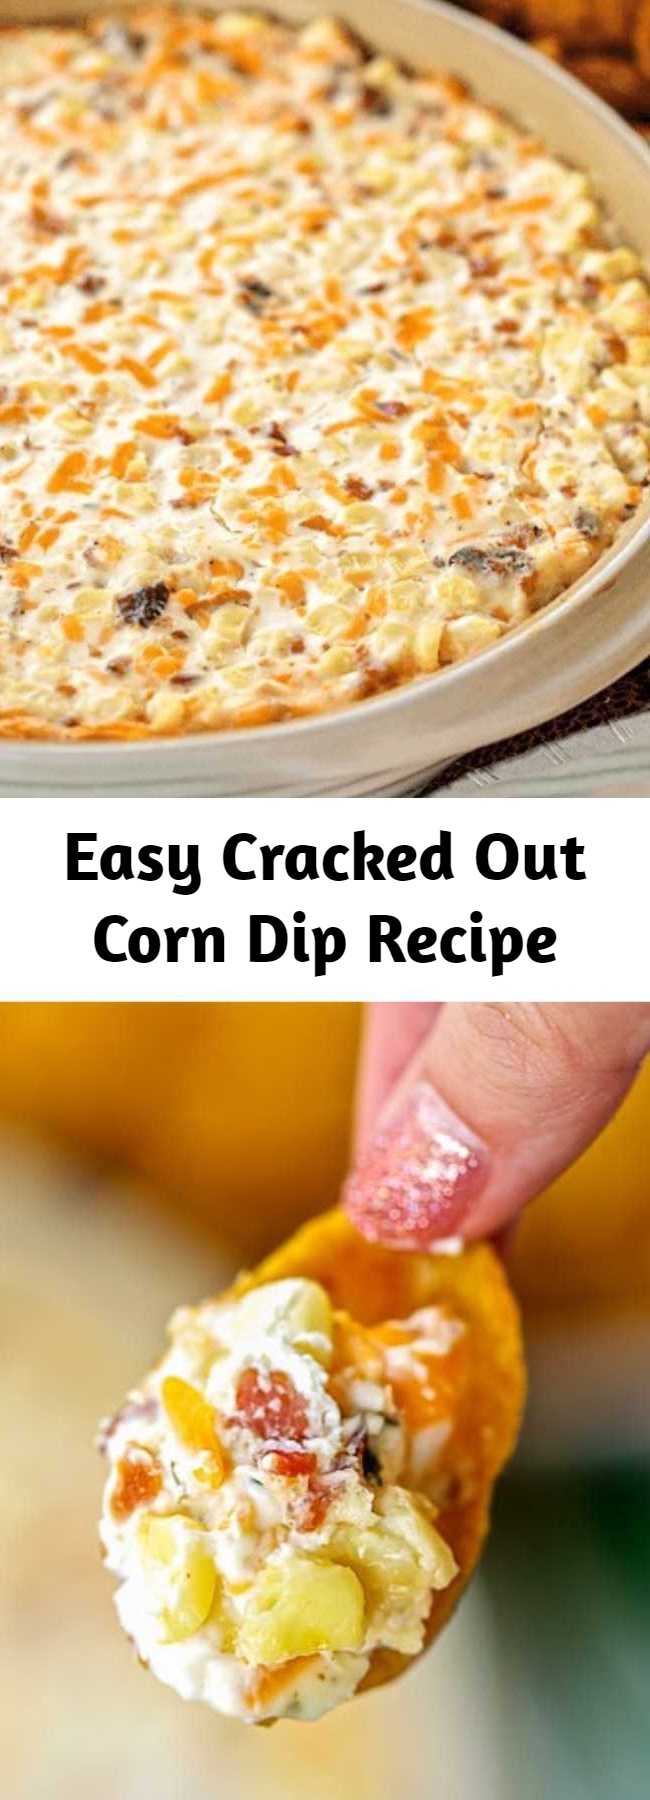 Easy Cracked Out Corn Dip Recipe - Corn, cream cheese, sour cream, cheddar, bacon and Ranch. I took this to a party and it was the first thing to go! Can make ahead and refrigerate until ready to eat. Our FAVORITE dip! YUM #dip #appetizer #partyfood #corn #bacon #ranch